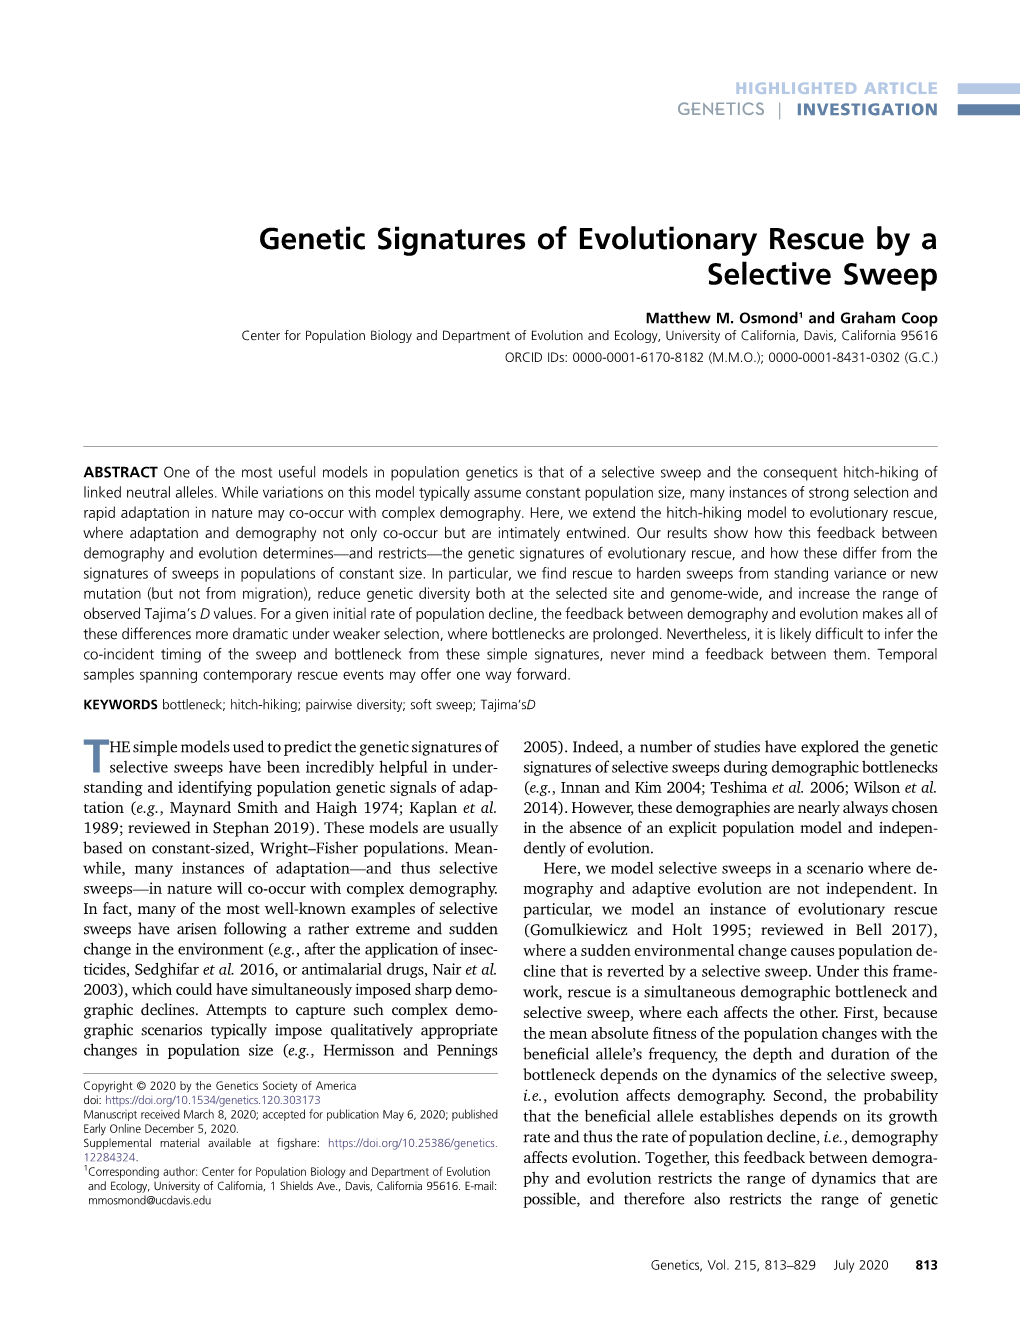 Genetic Signatures of Evolutionary Rescue by a Selective Sweep